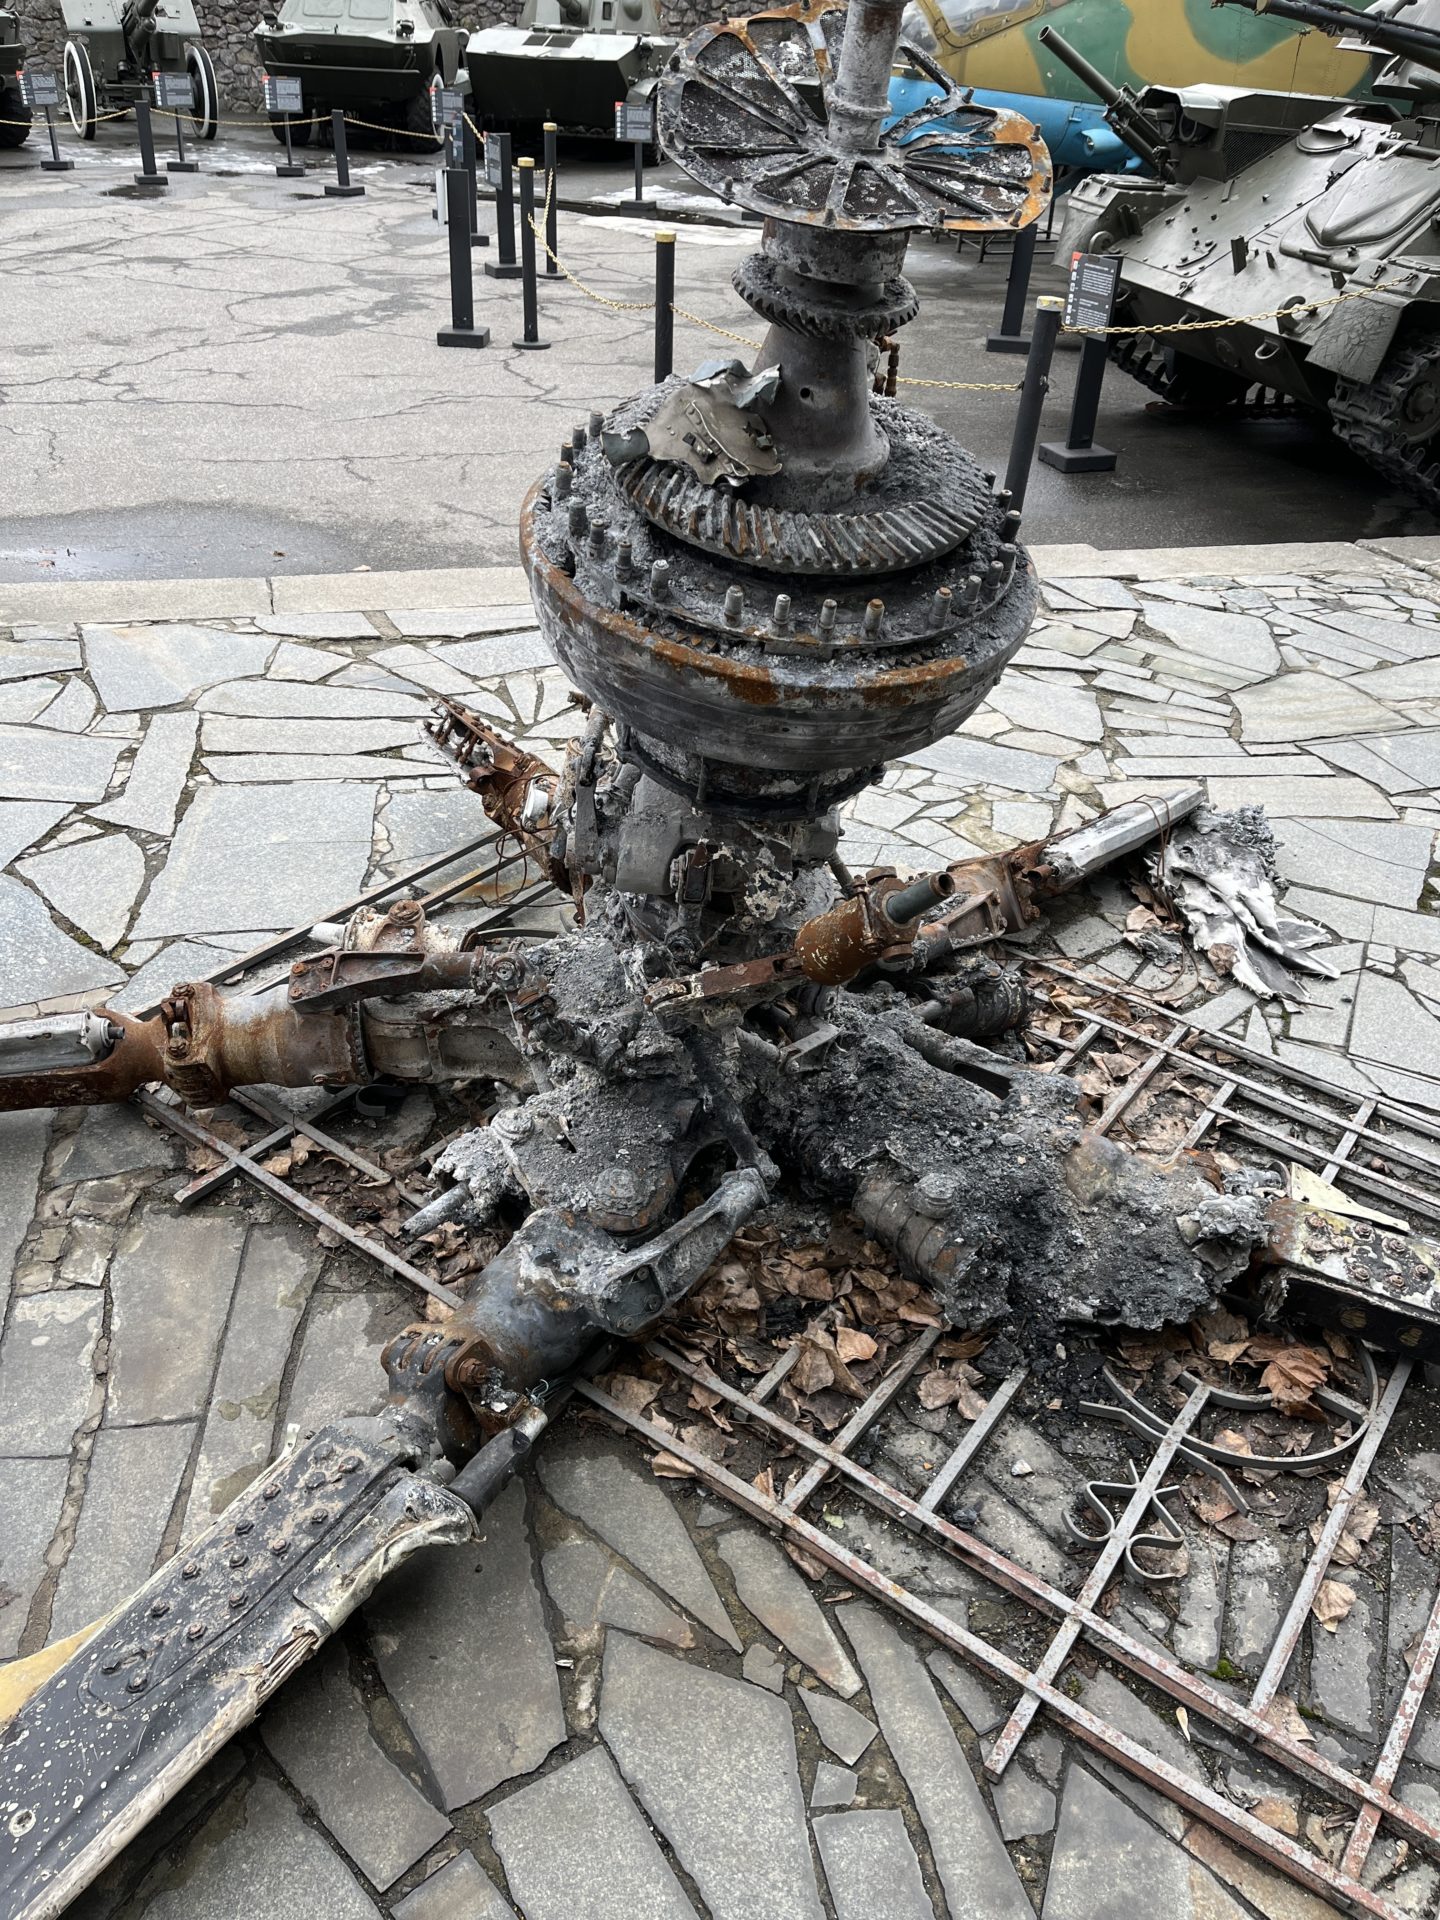 A destroyed Russian helicopter rotor outside a Kyiv war museum. Image: Aisling Moore/Newstalk